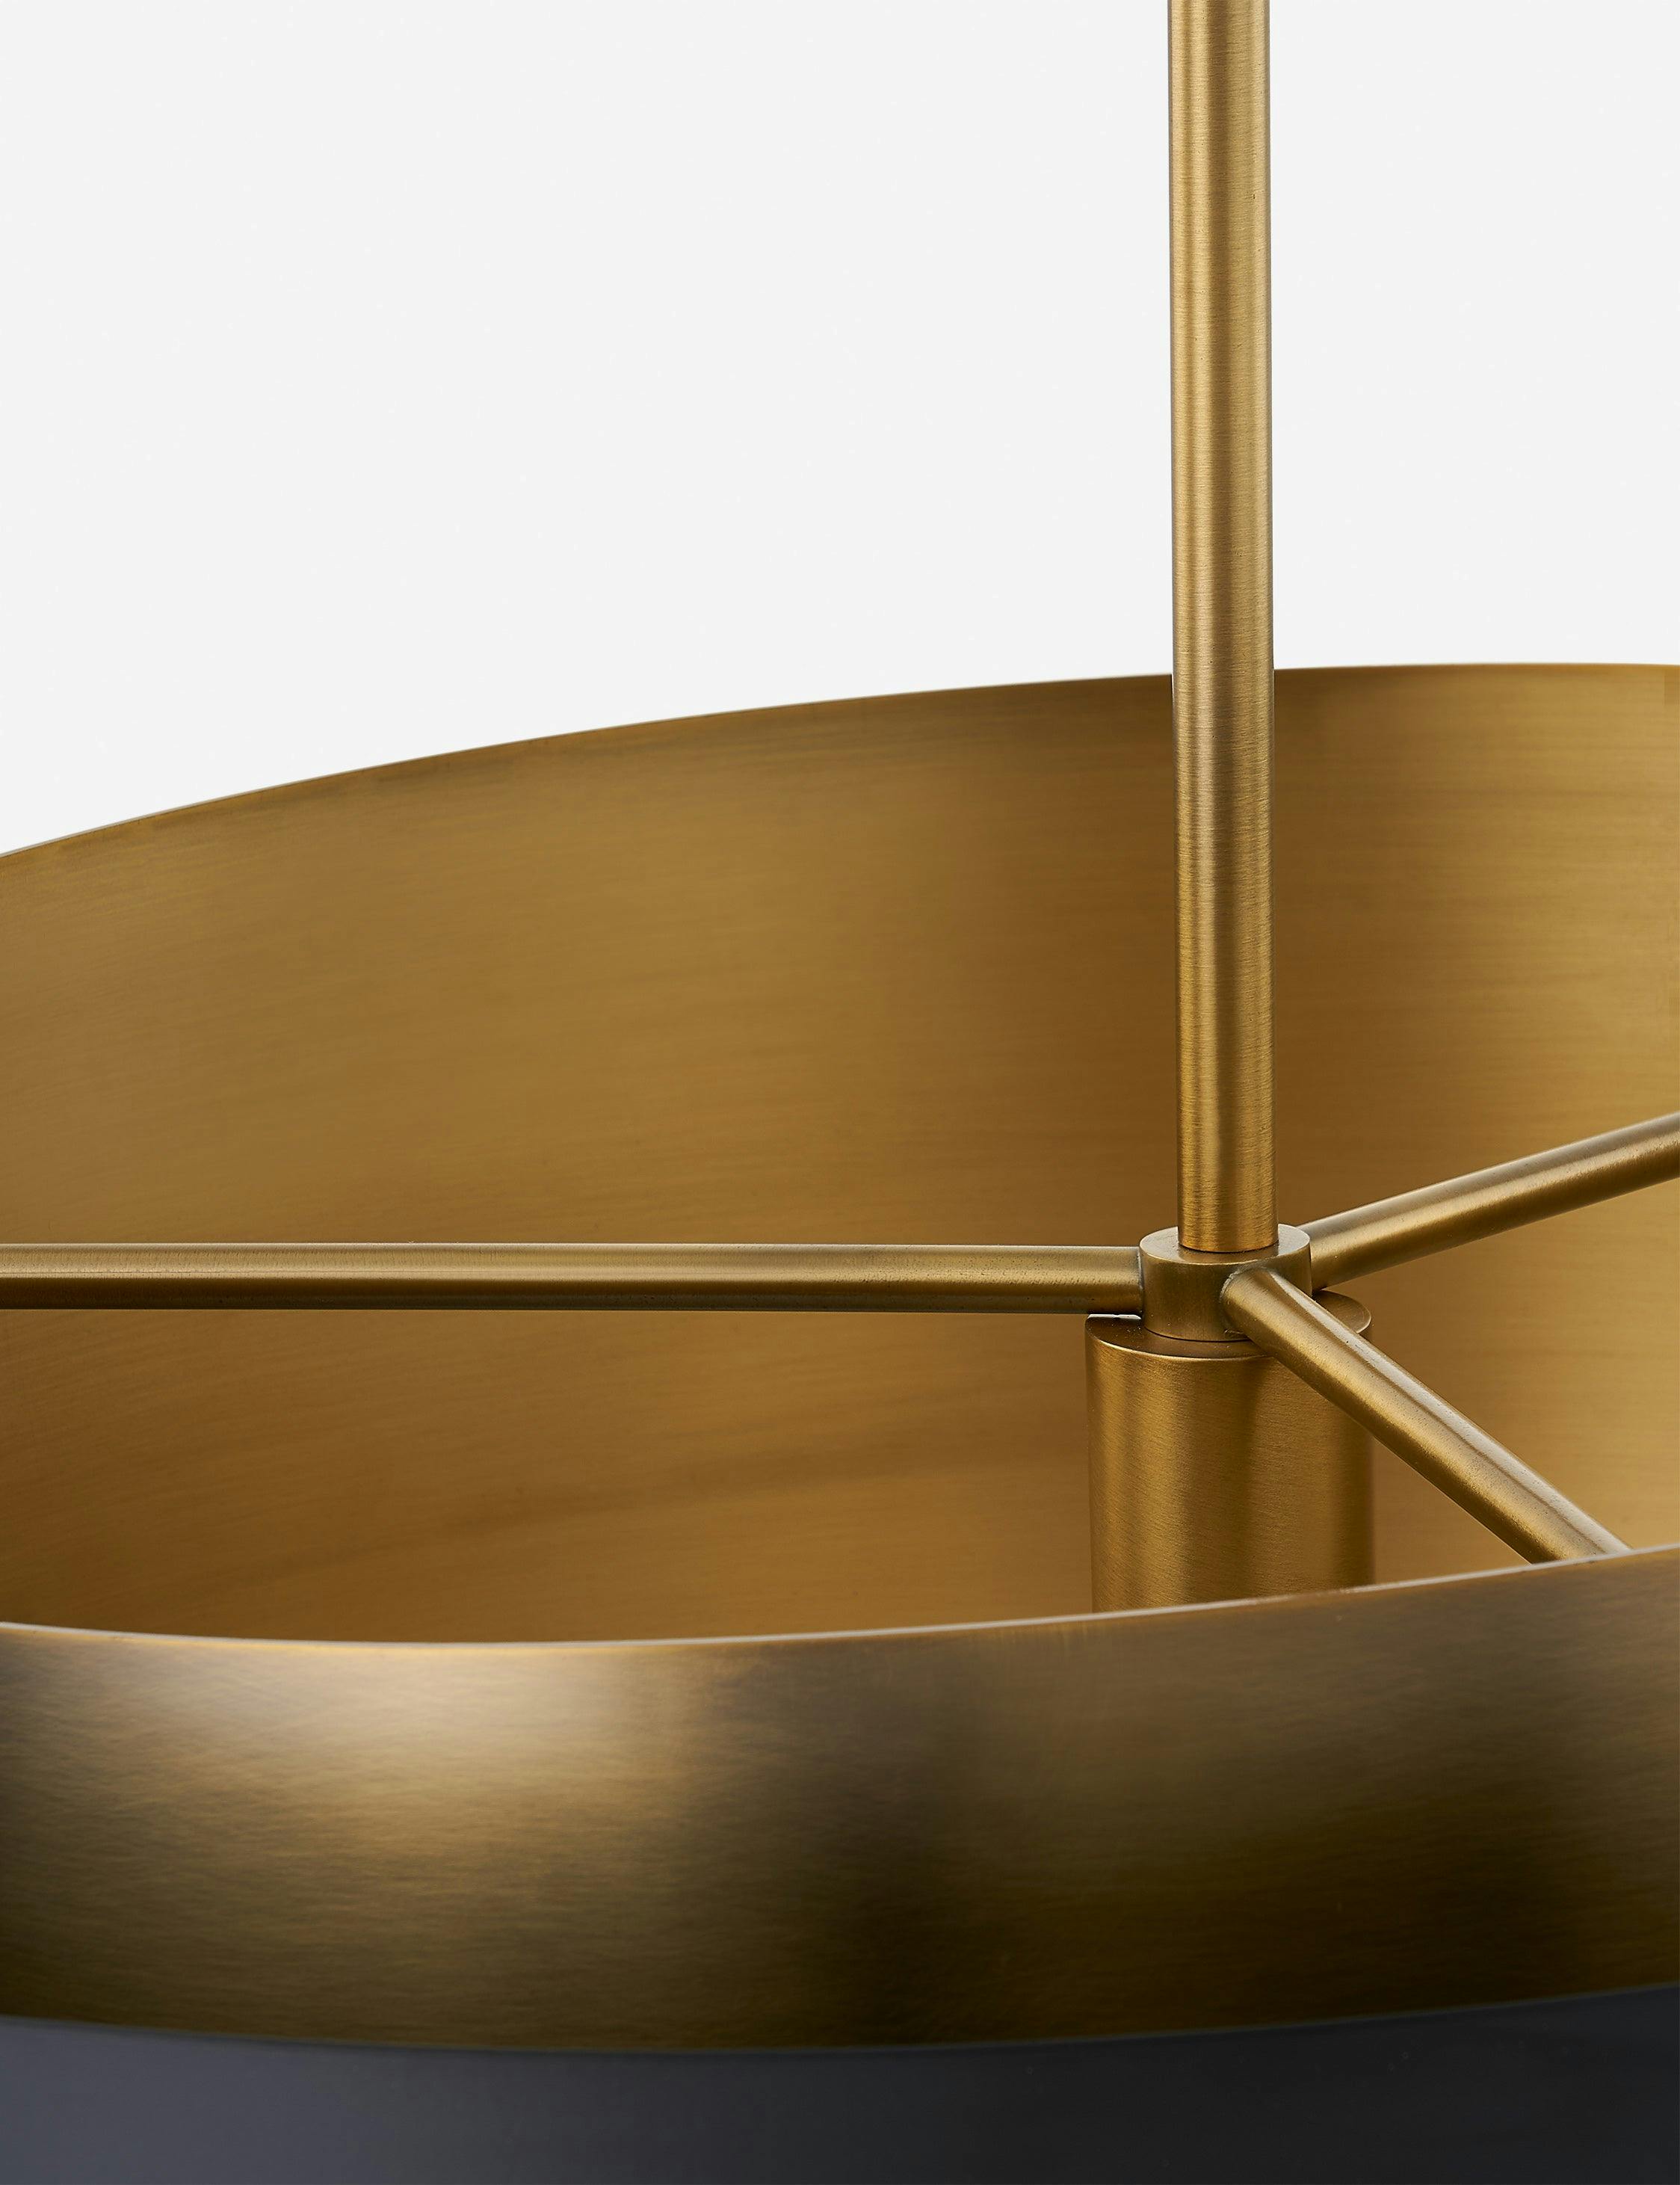 Roux Pendant Light by Colin King x Troy Lighting - Brass and Black / 25" Dia